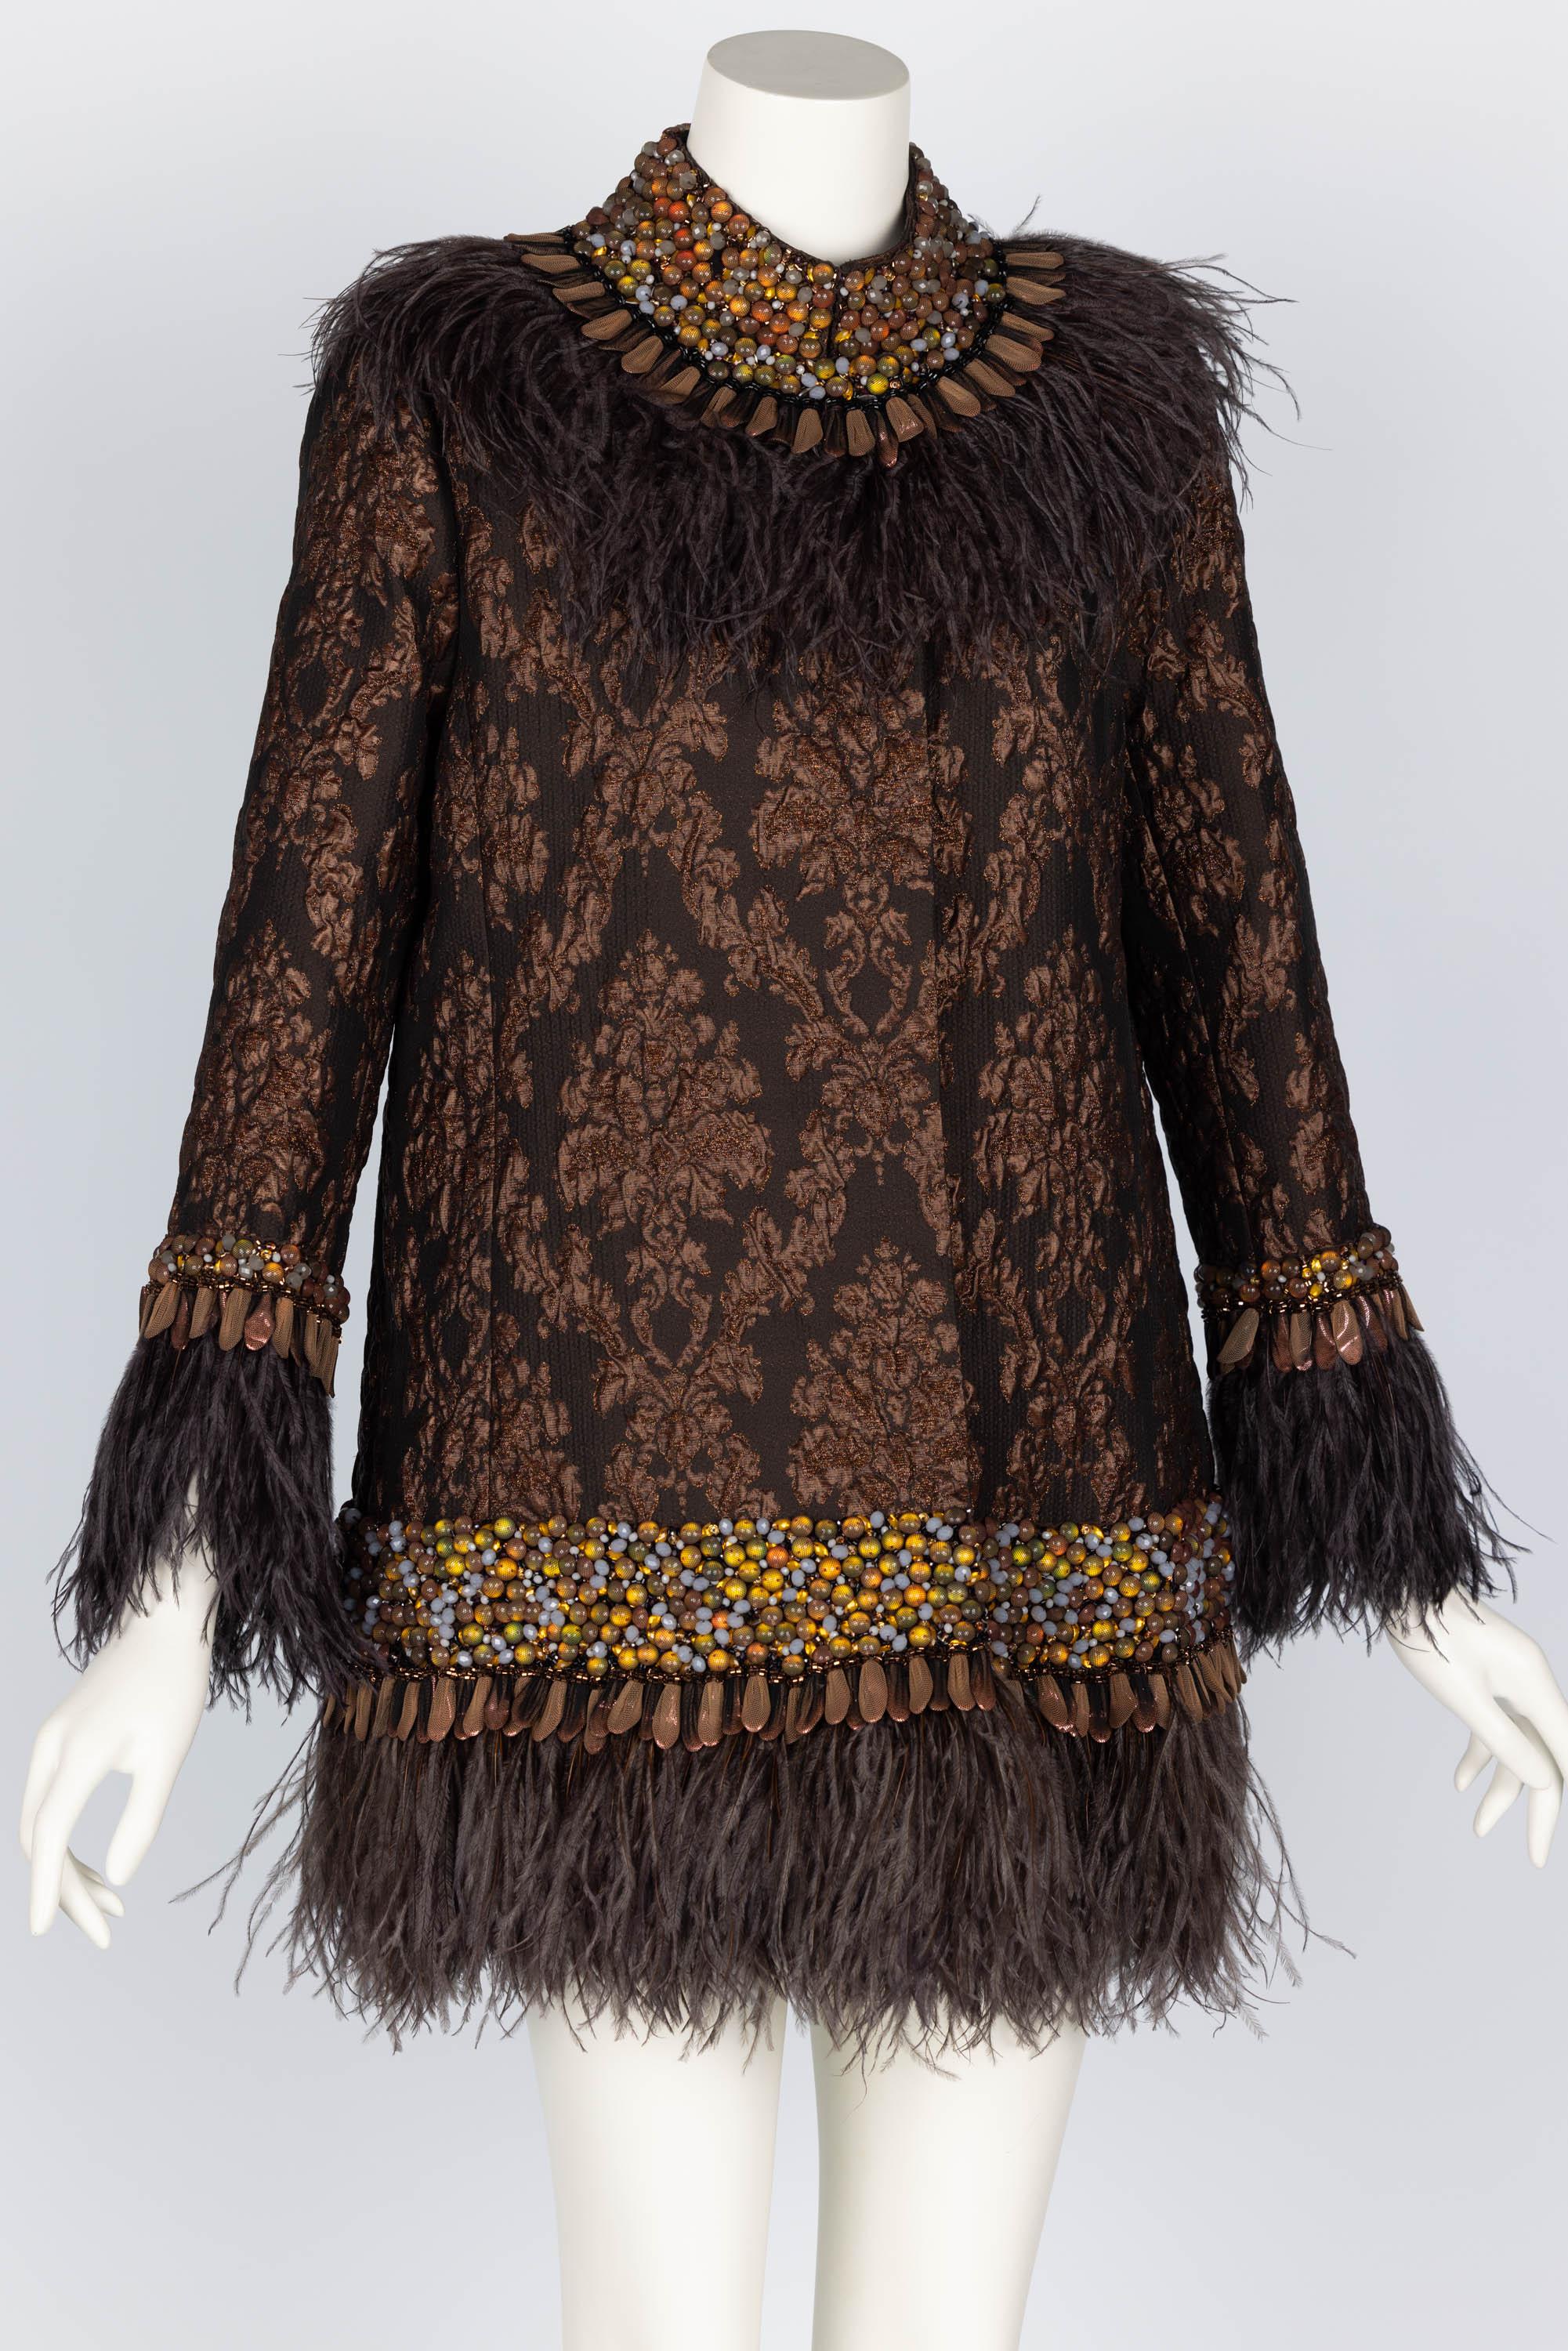 Done in a rich brown silk brocade with metallic copper accents. A collage of jewels covered in tulle surrounds the collar, cuff, and bottom of this evening coat. Brown feather trim. 
Fully lined.
Concealed snap closures.
Excellent condition.

Size